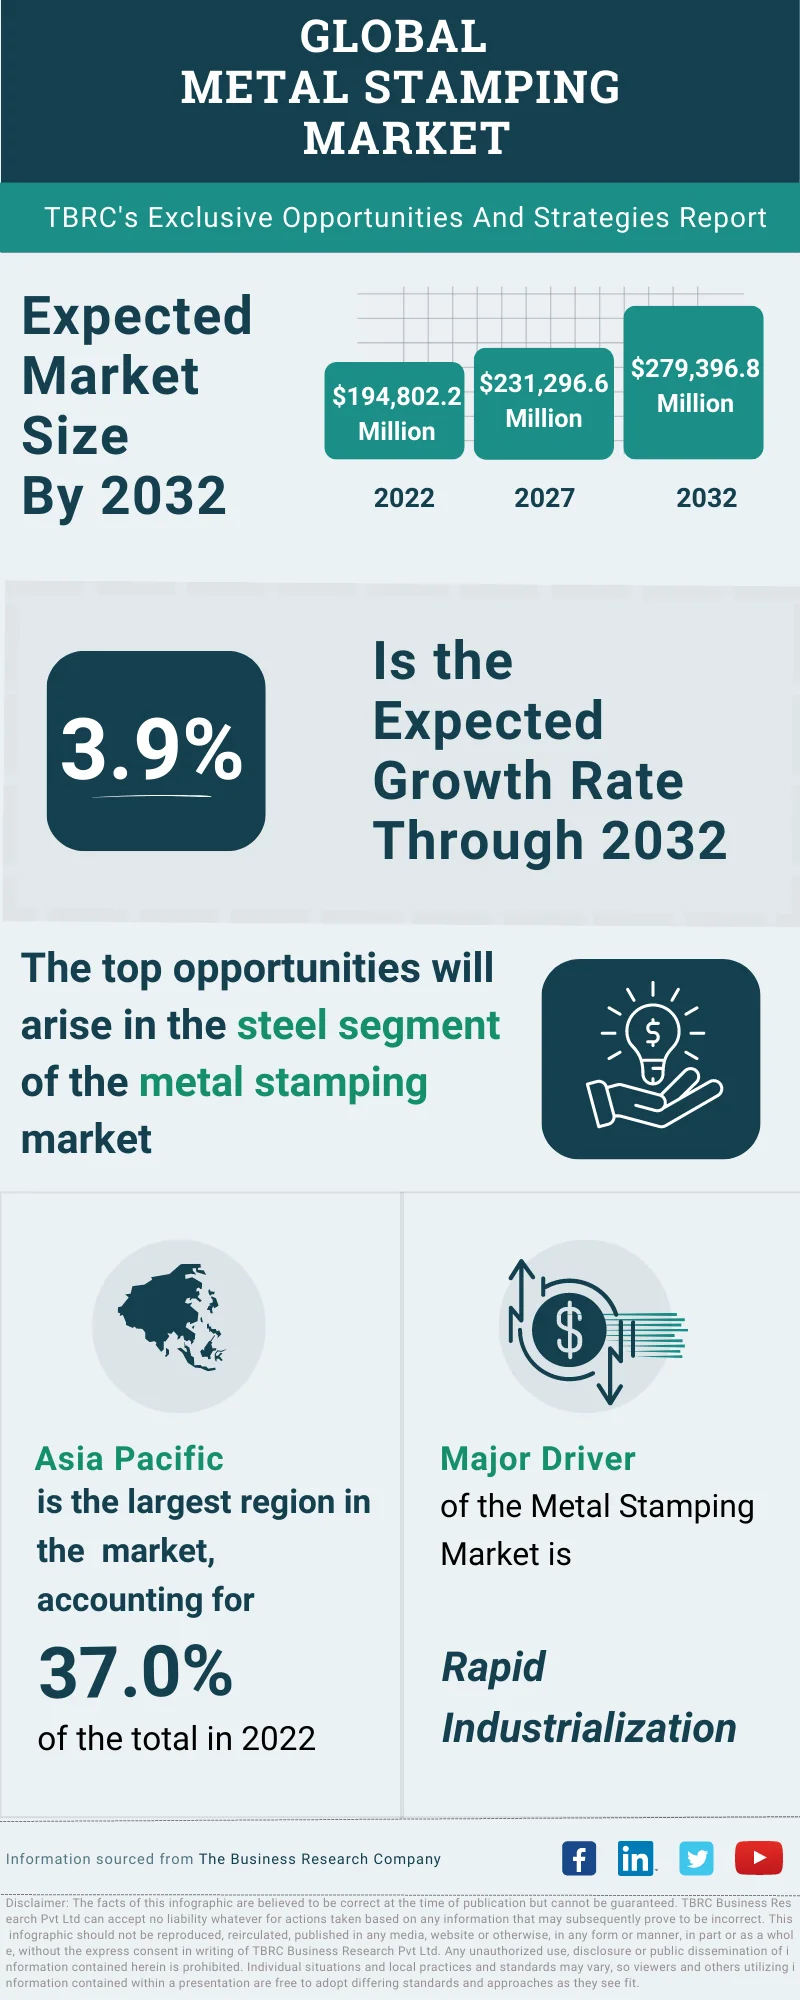 Metal Stamping Global Market Opportunities And Strategies To 2032